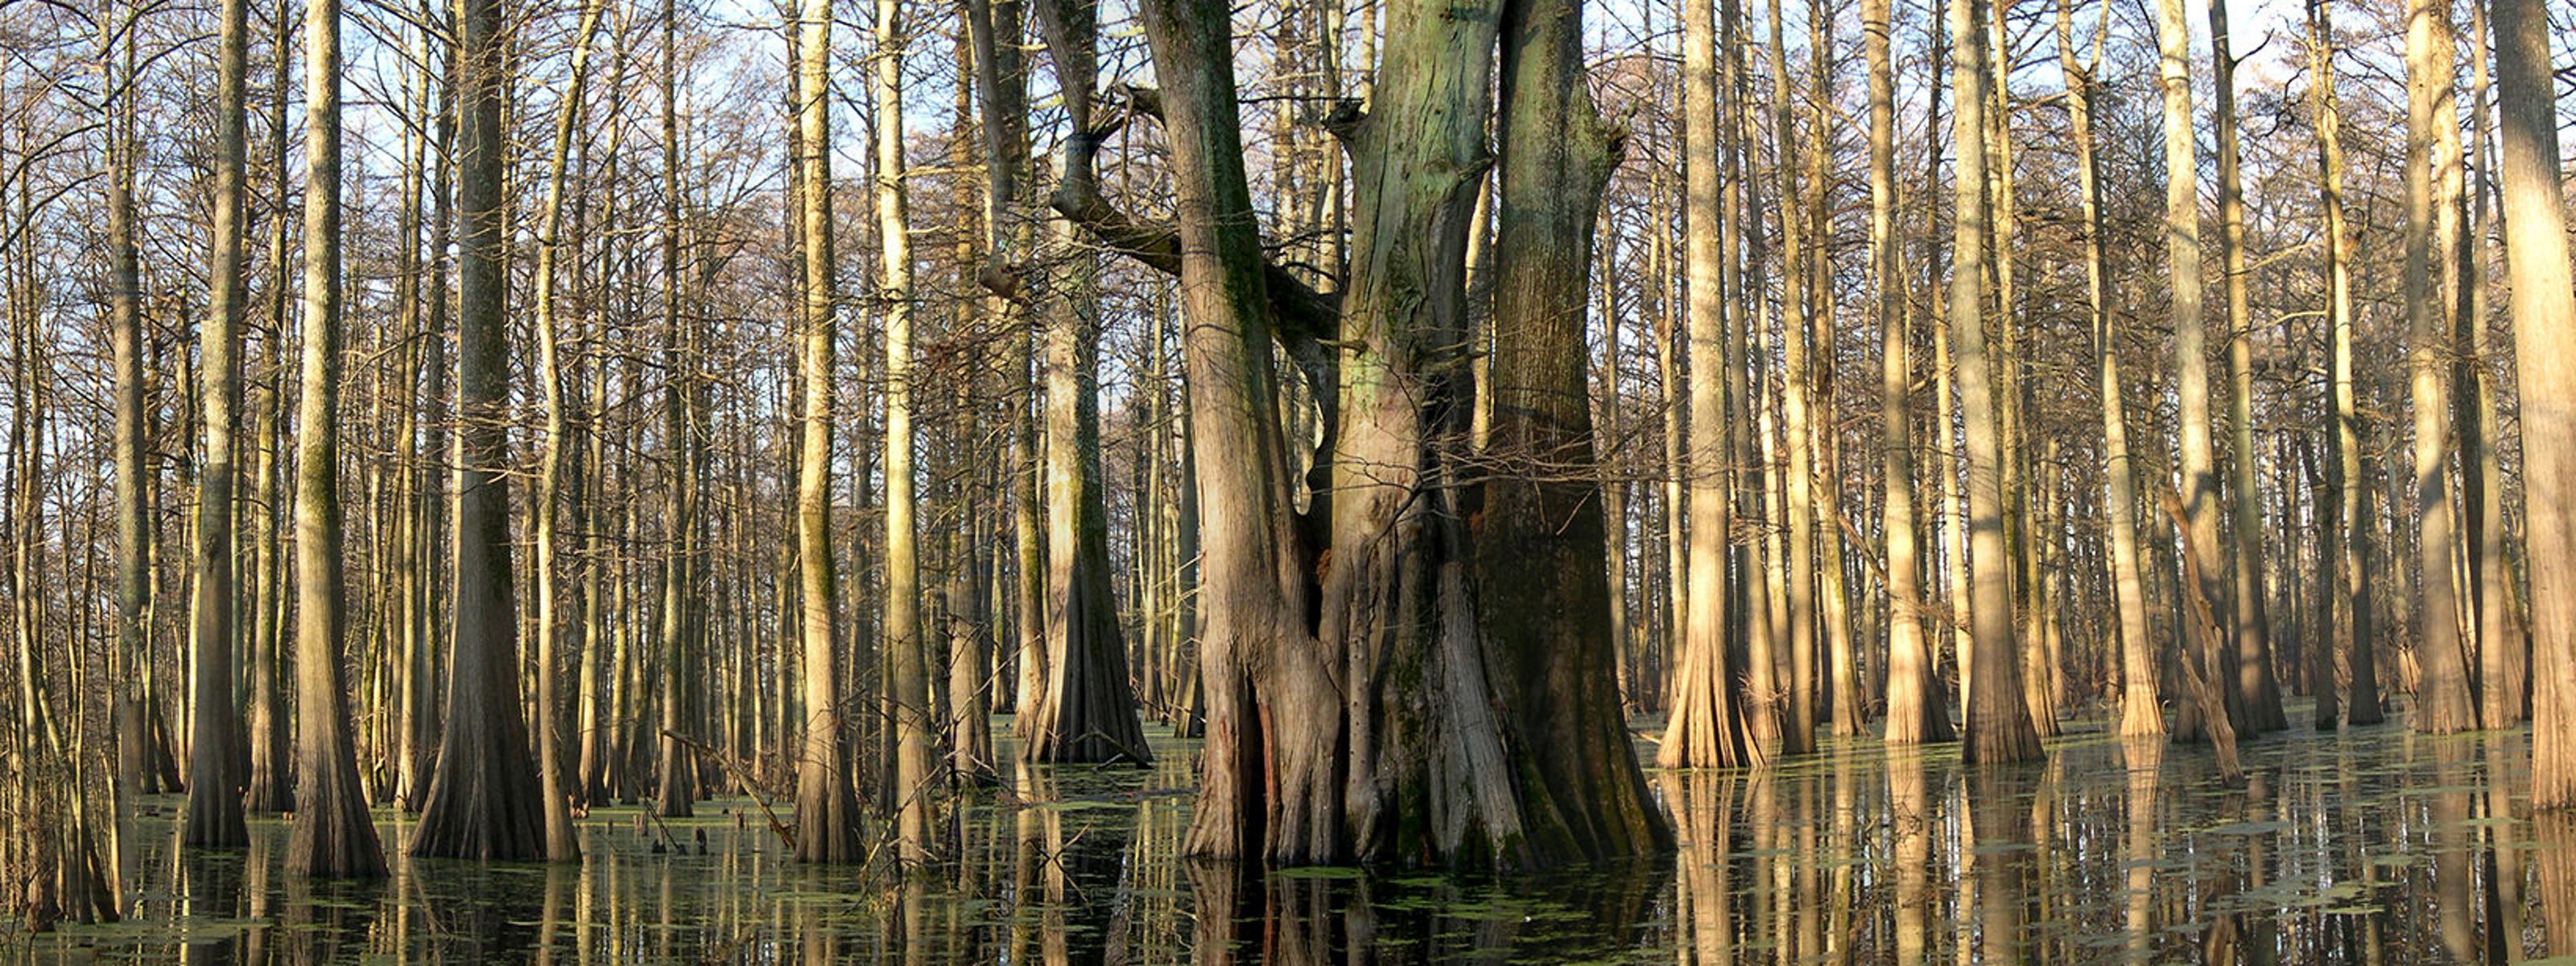 Early morning view of trees rising from waters in wetlands area.